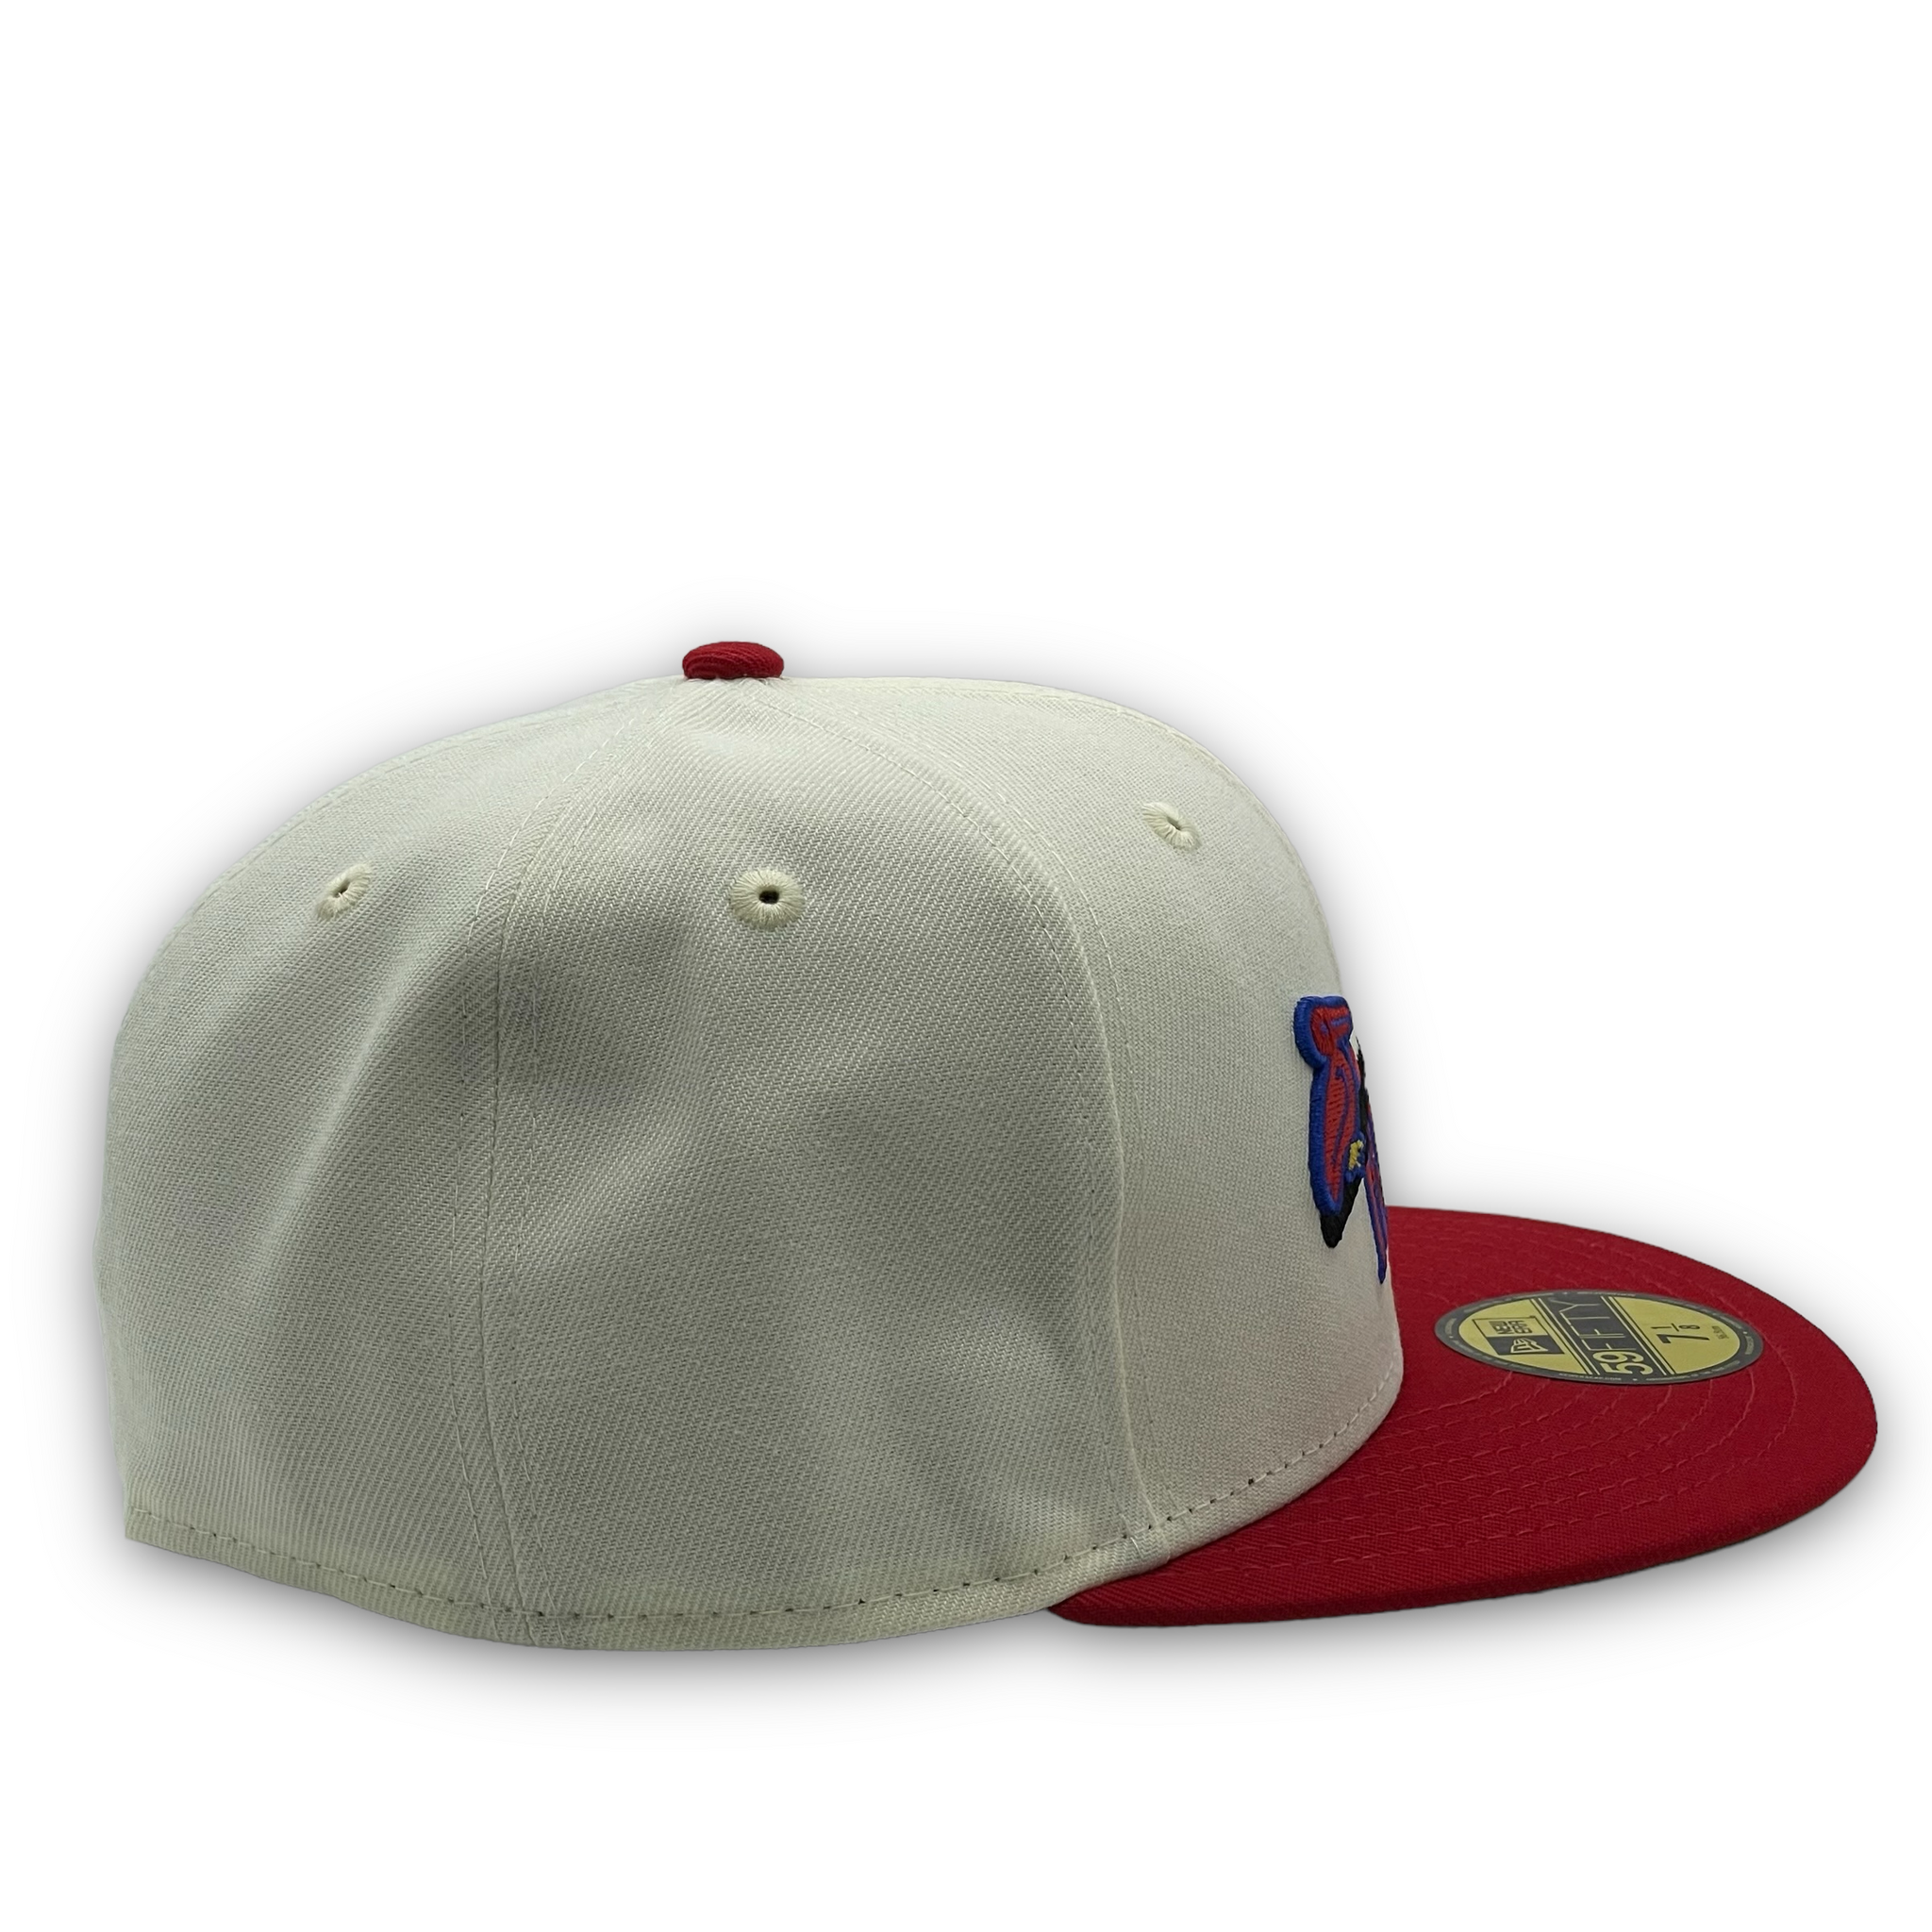 59FIFTY Milb New Orleans Pelicans 1942 Jersey Front 2-Tone Chrome/Red - Green UV 7